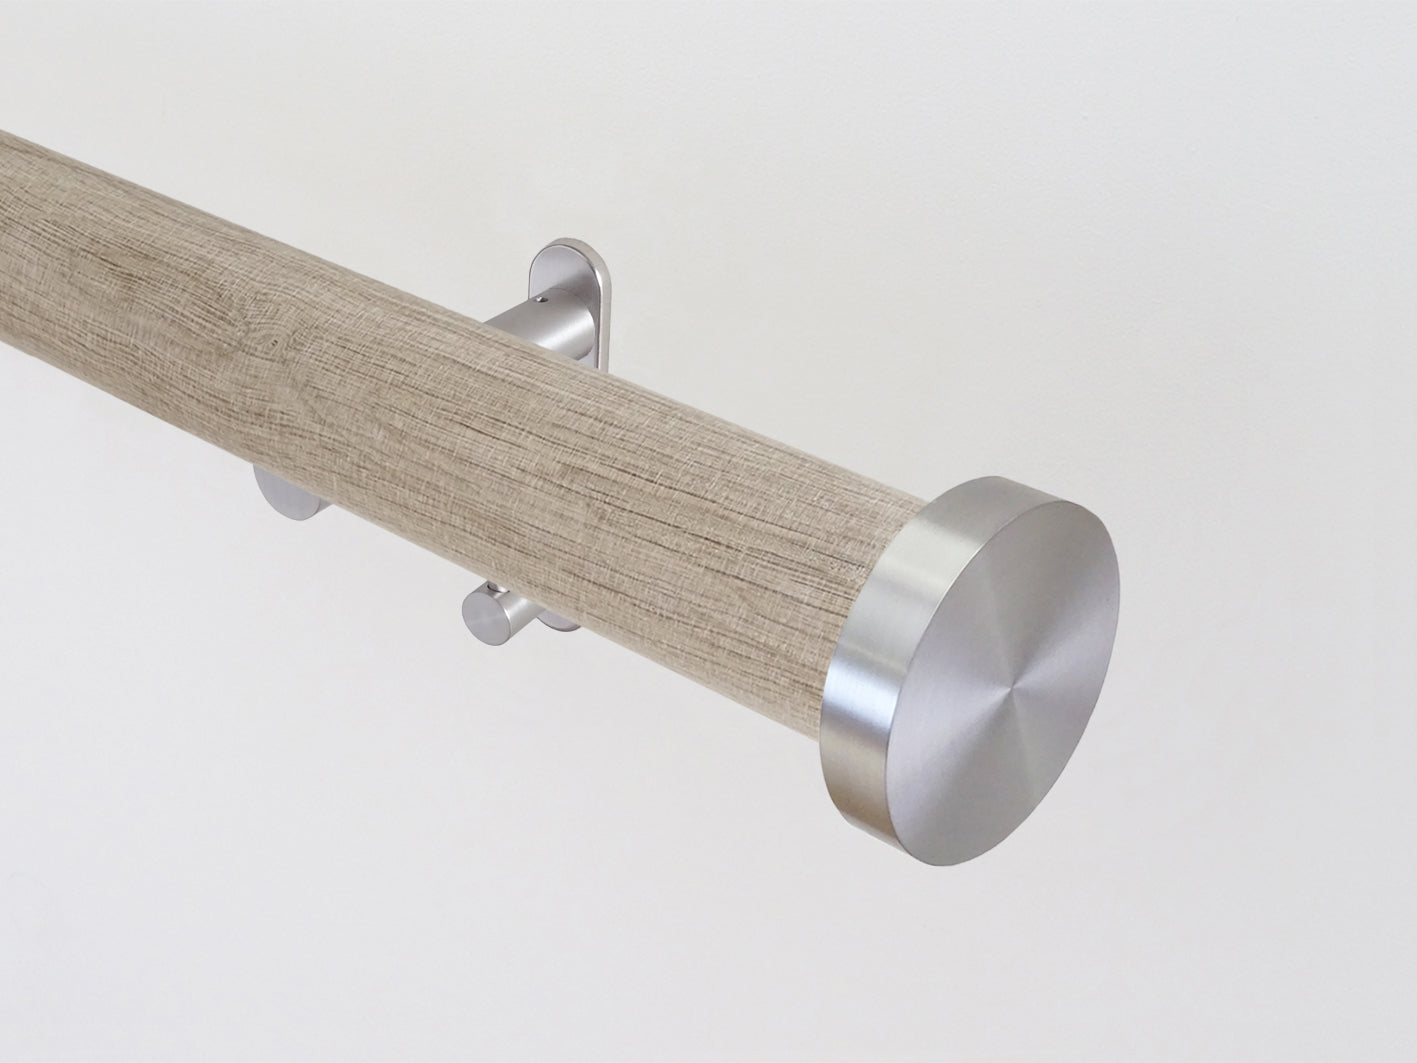 Real solid oak curtain pole - unfinished. Stainless steel brackets, finials & rings